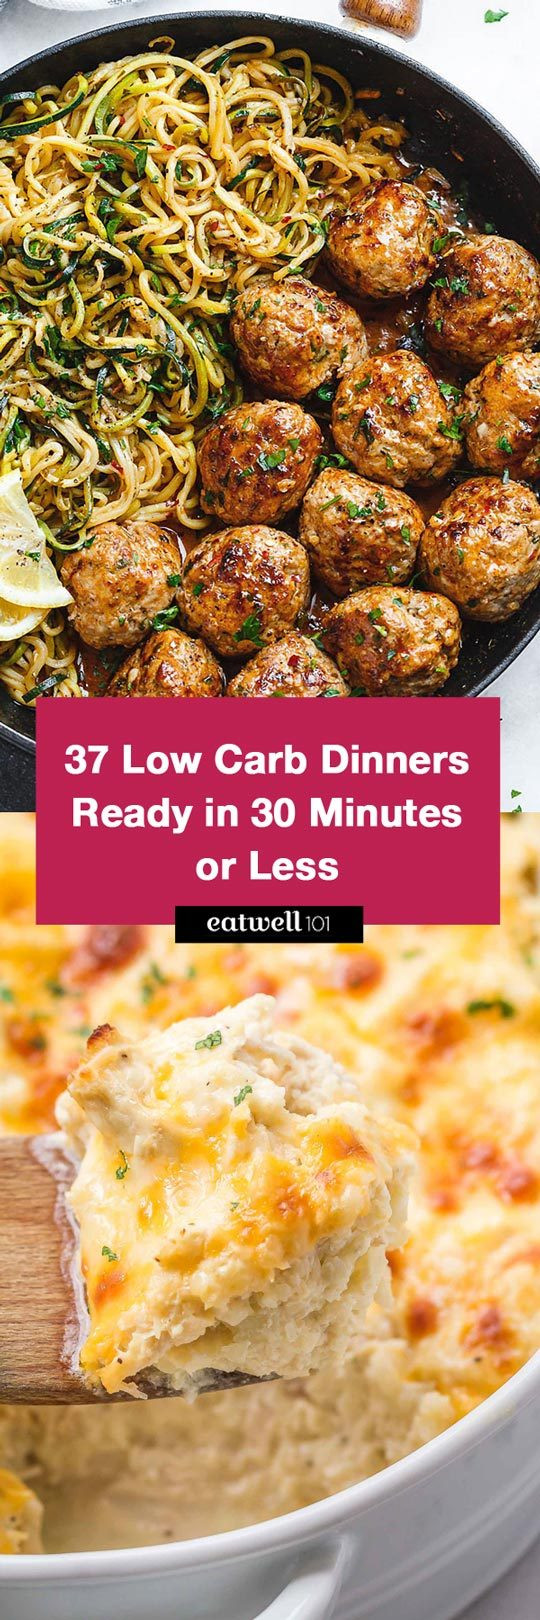 Quick Low Carb Recipes
 Low Carb Recipes 78 Quick Low Carb Dinners Ready in 30